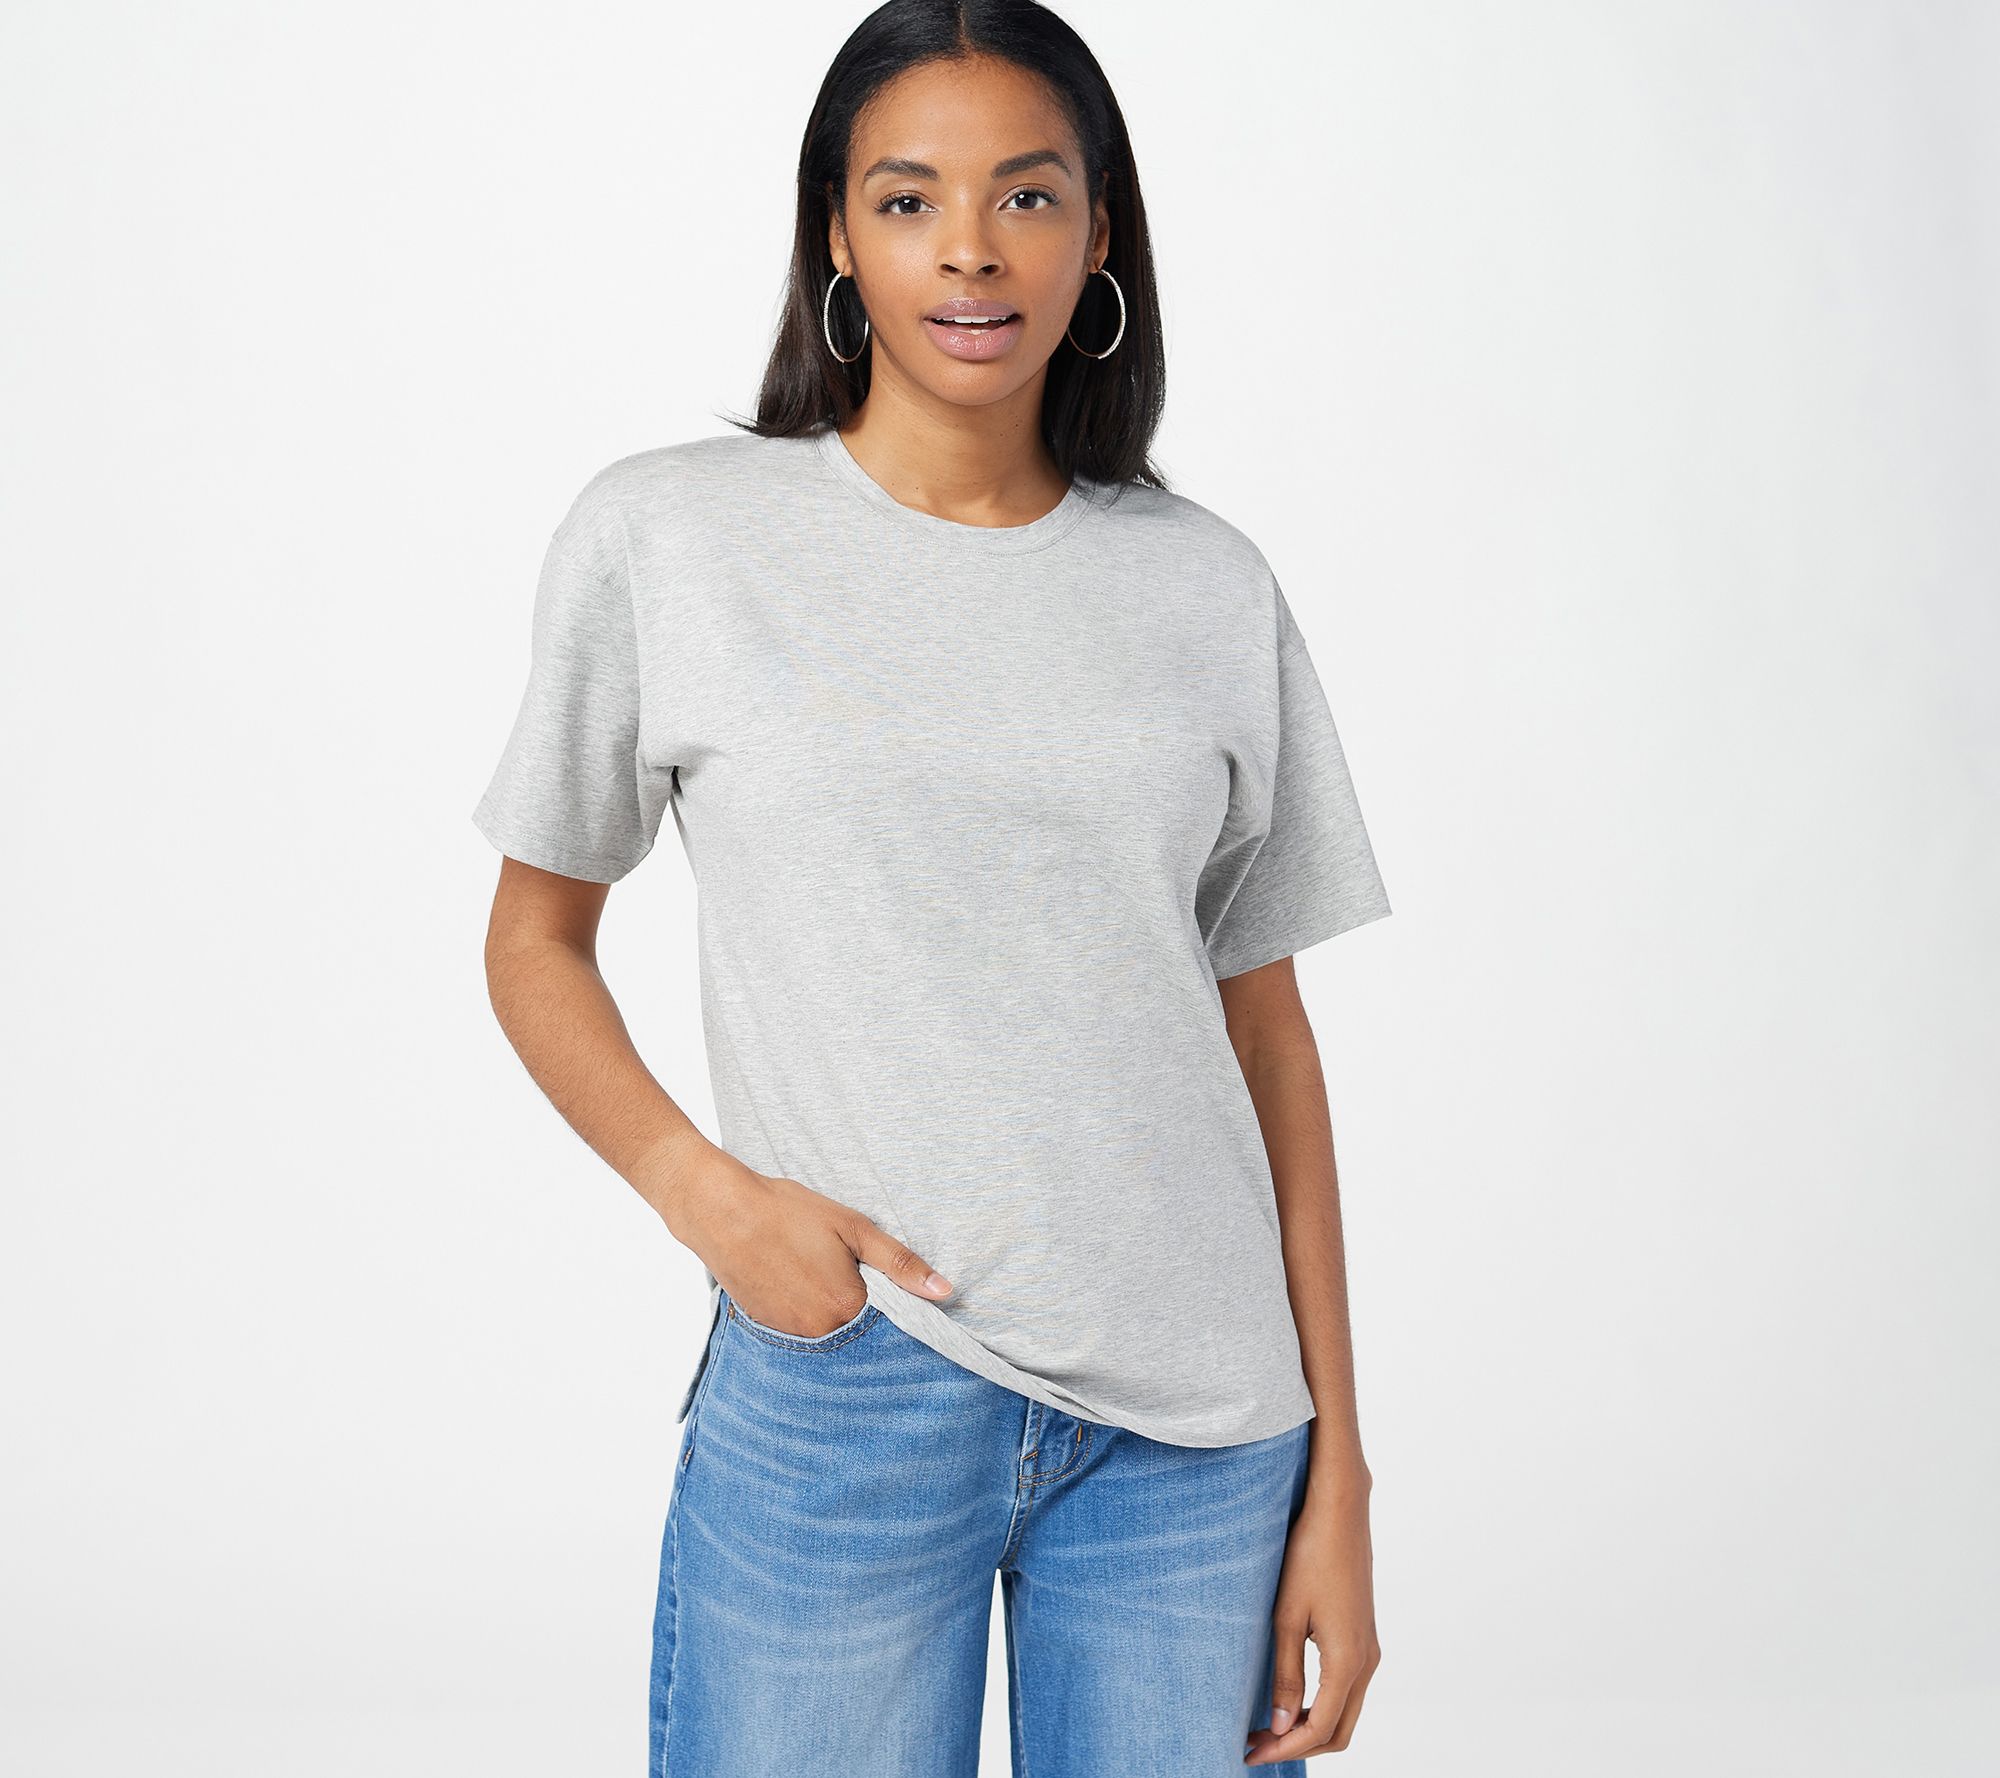 Serra Retreat by Joie Rucker The Relaxed Tunic Tee - QVC.com